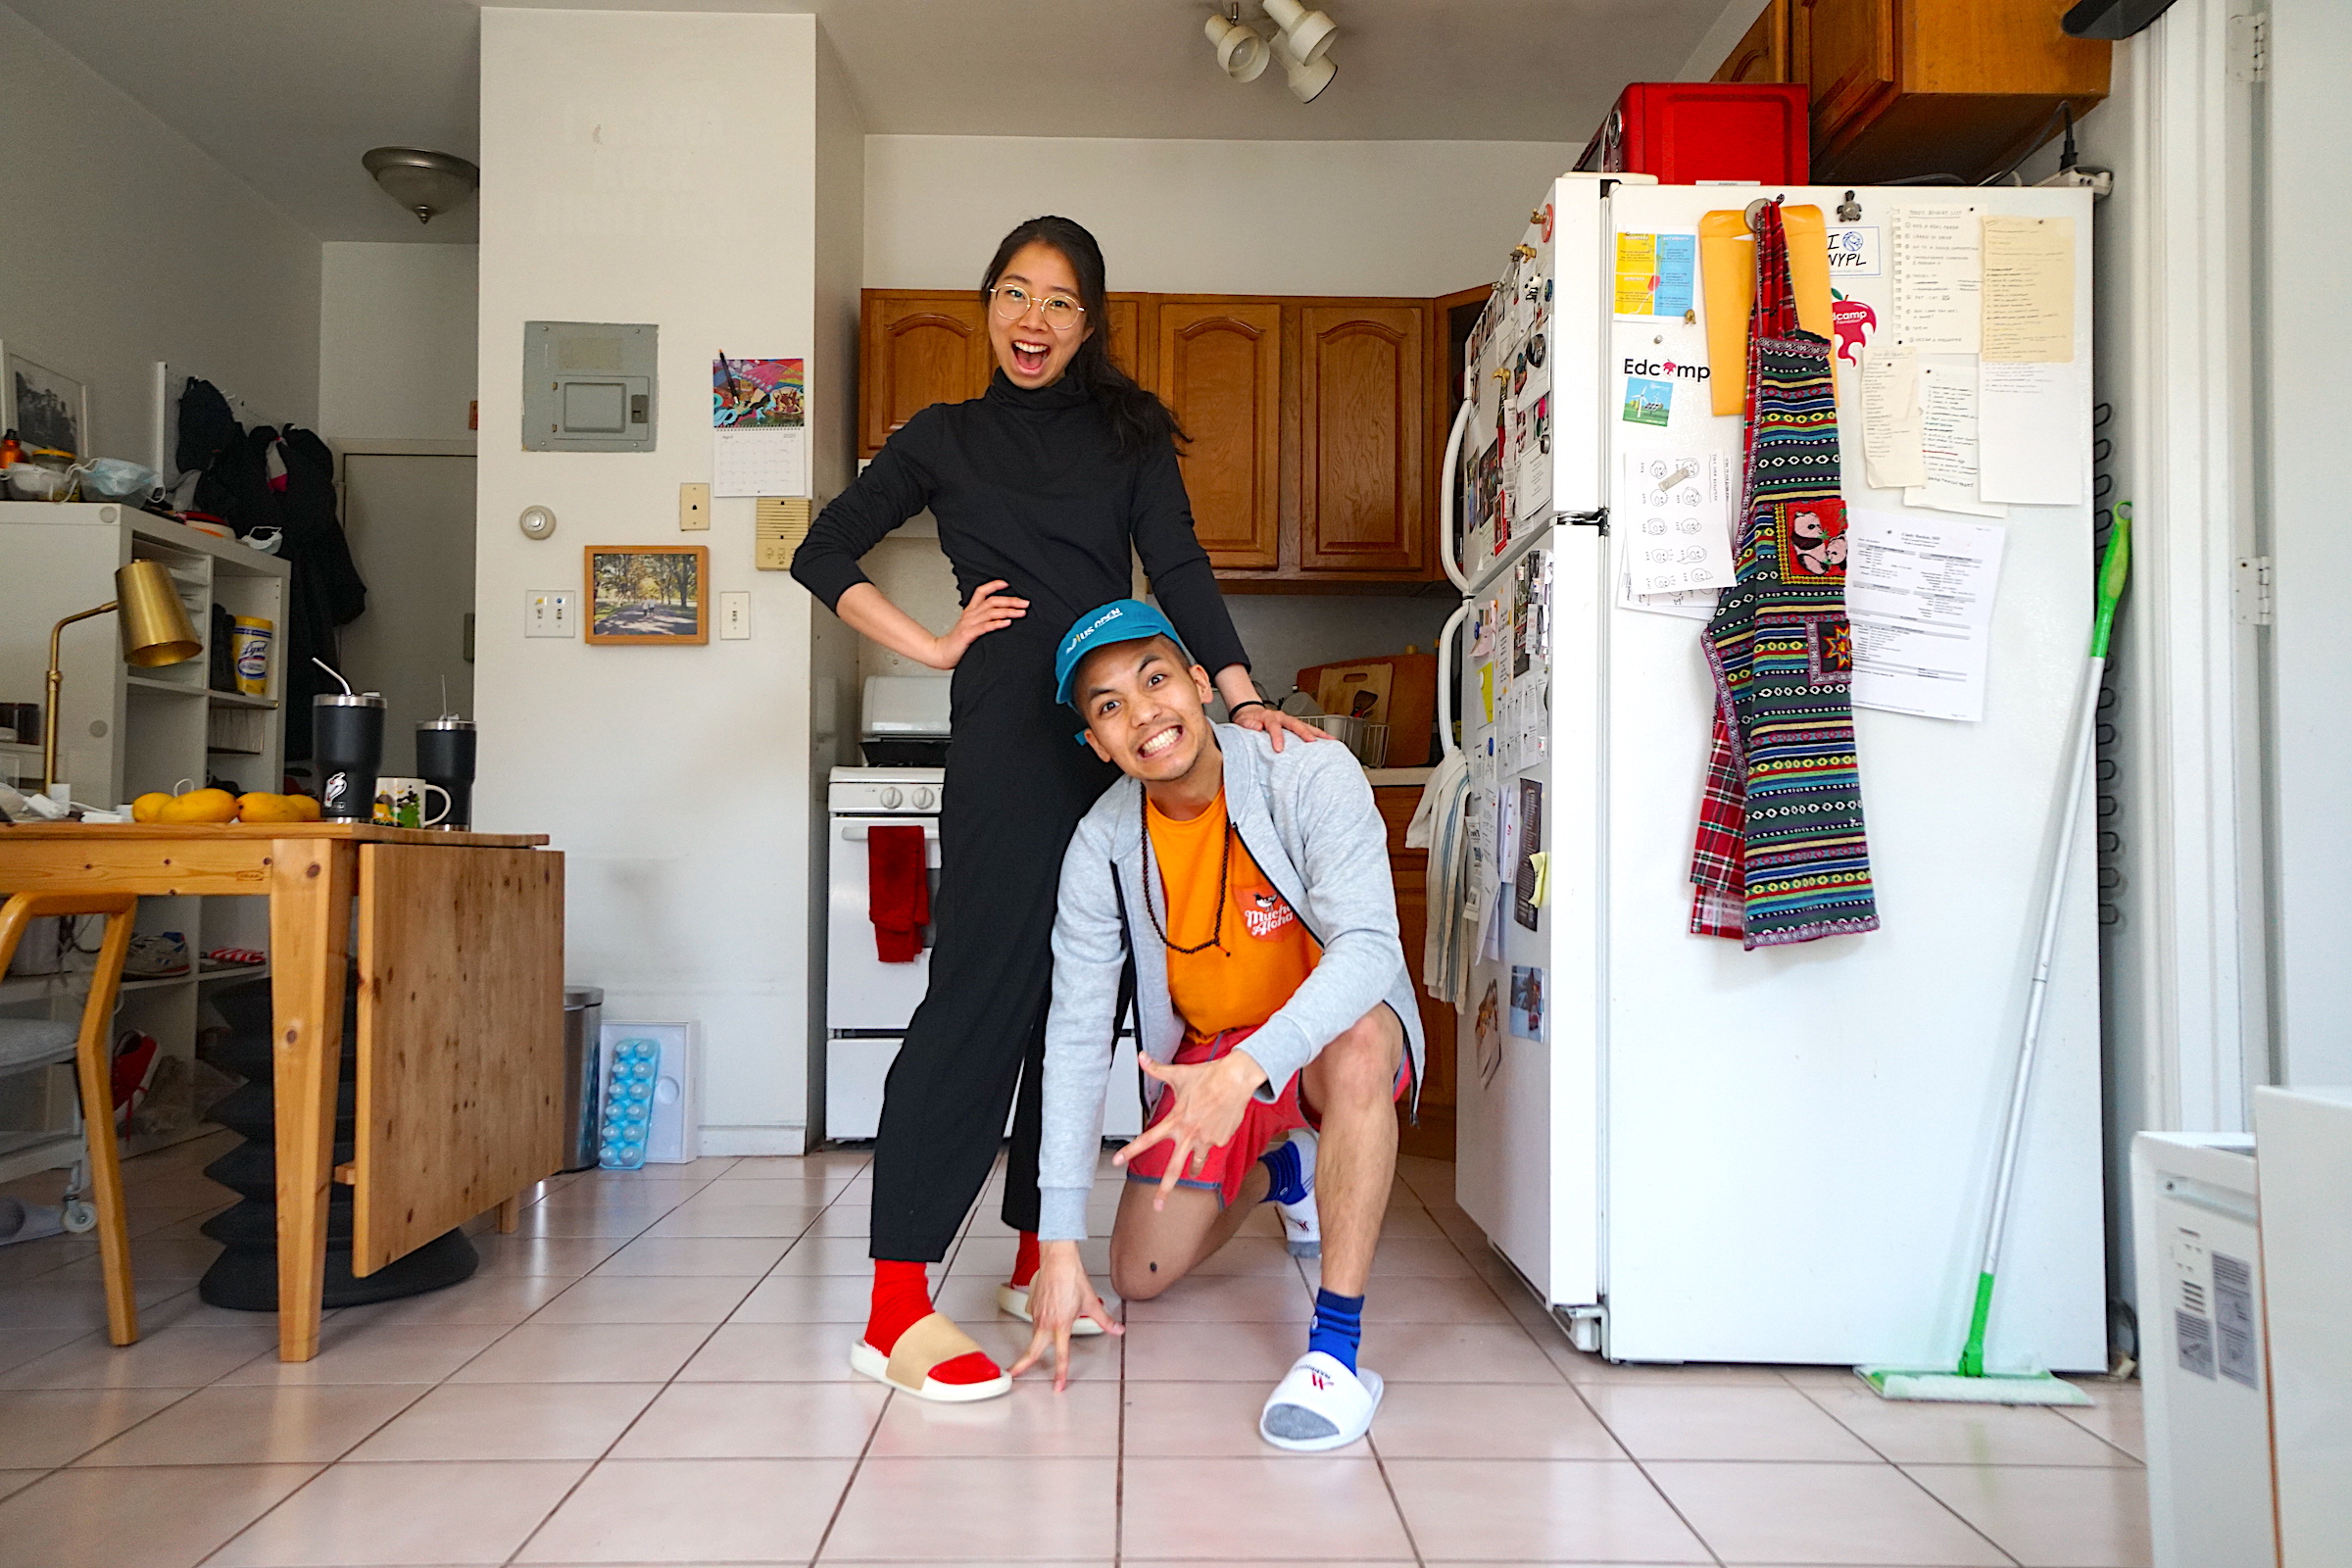 A color photo of me and Kevin posing in our apartment. We’re dressed like we might go outside, except we’re both wearing indoor slippers. Kevin is kneeling, and I’m standing up straight with my hand on his shoulder.